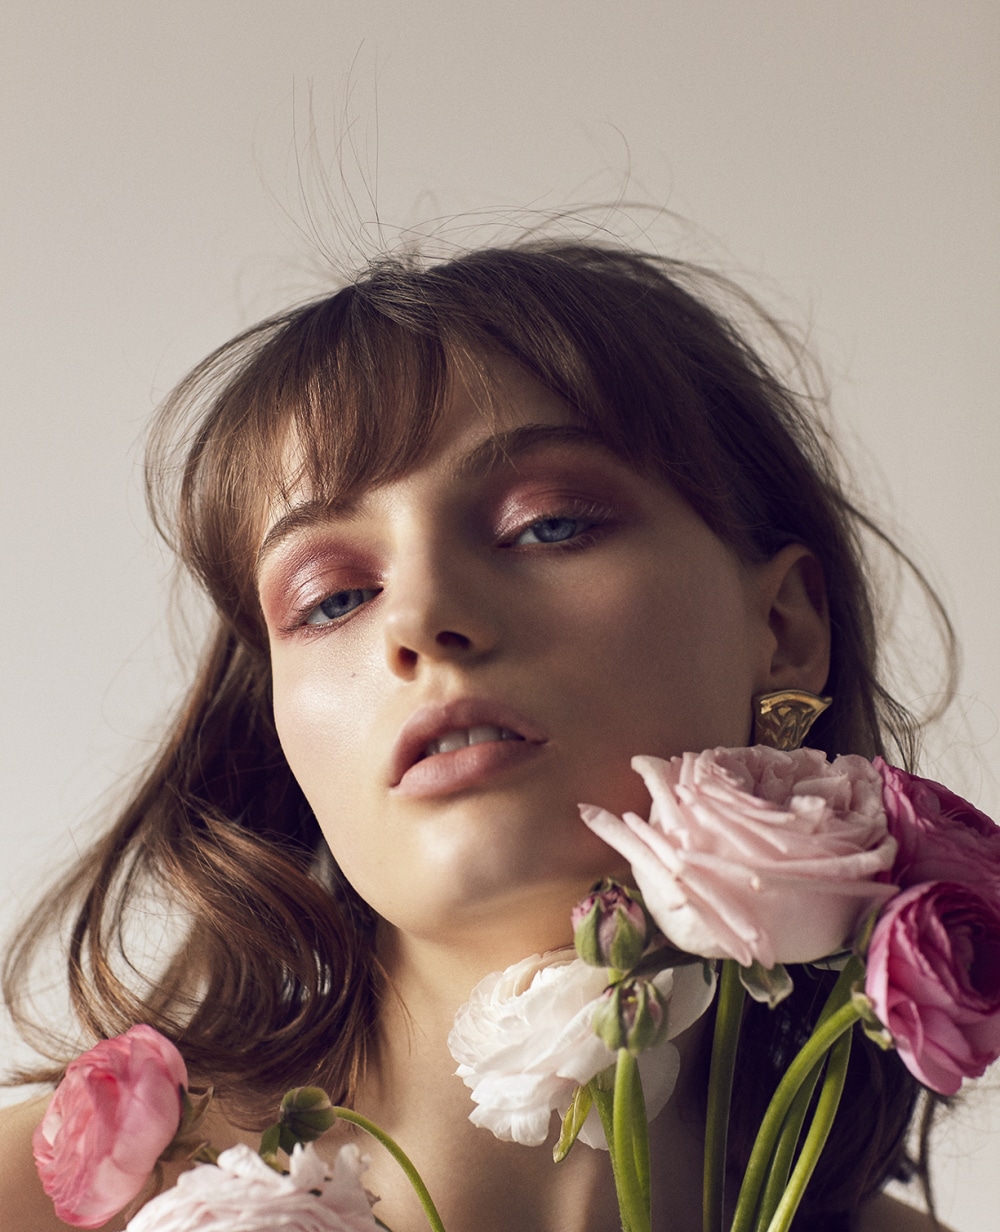 ROSE Editorial Fran Summers by Leah Band